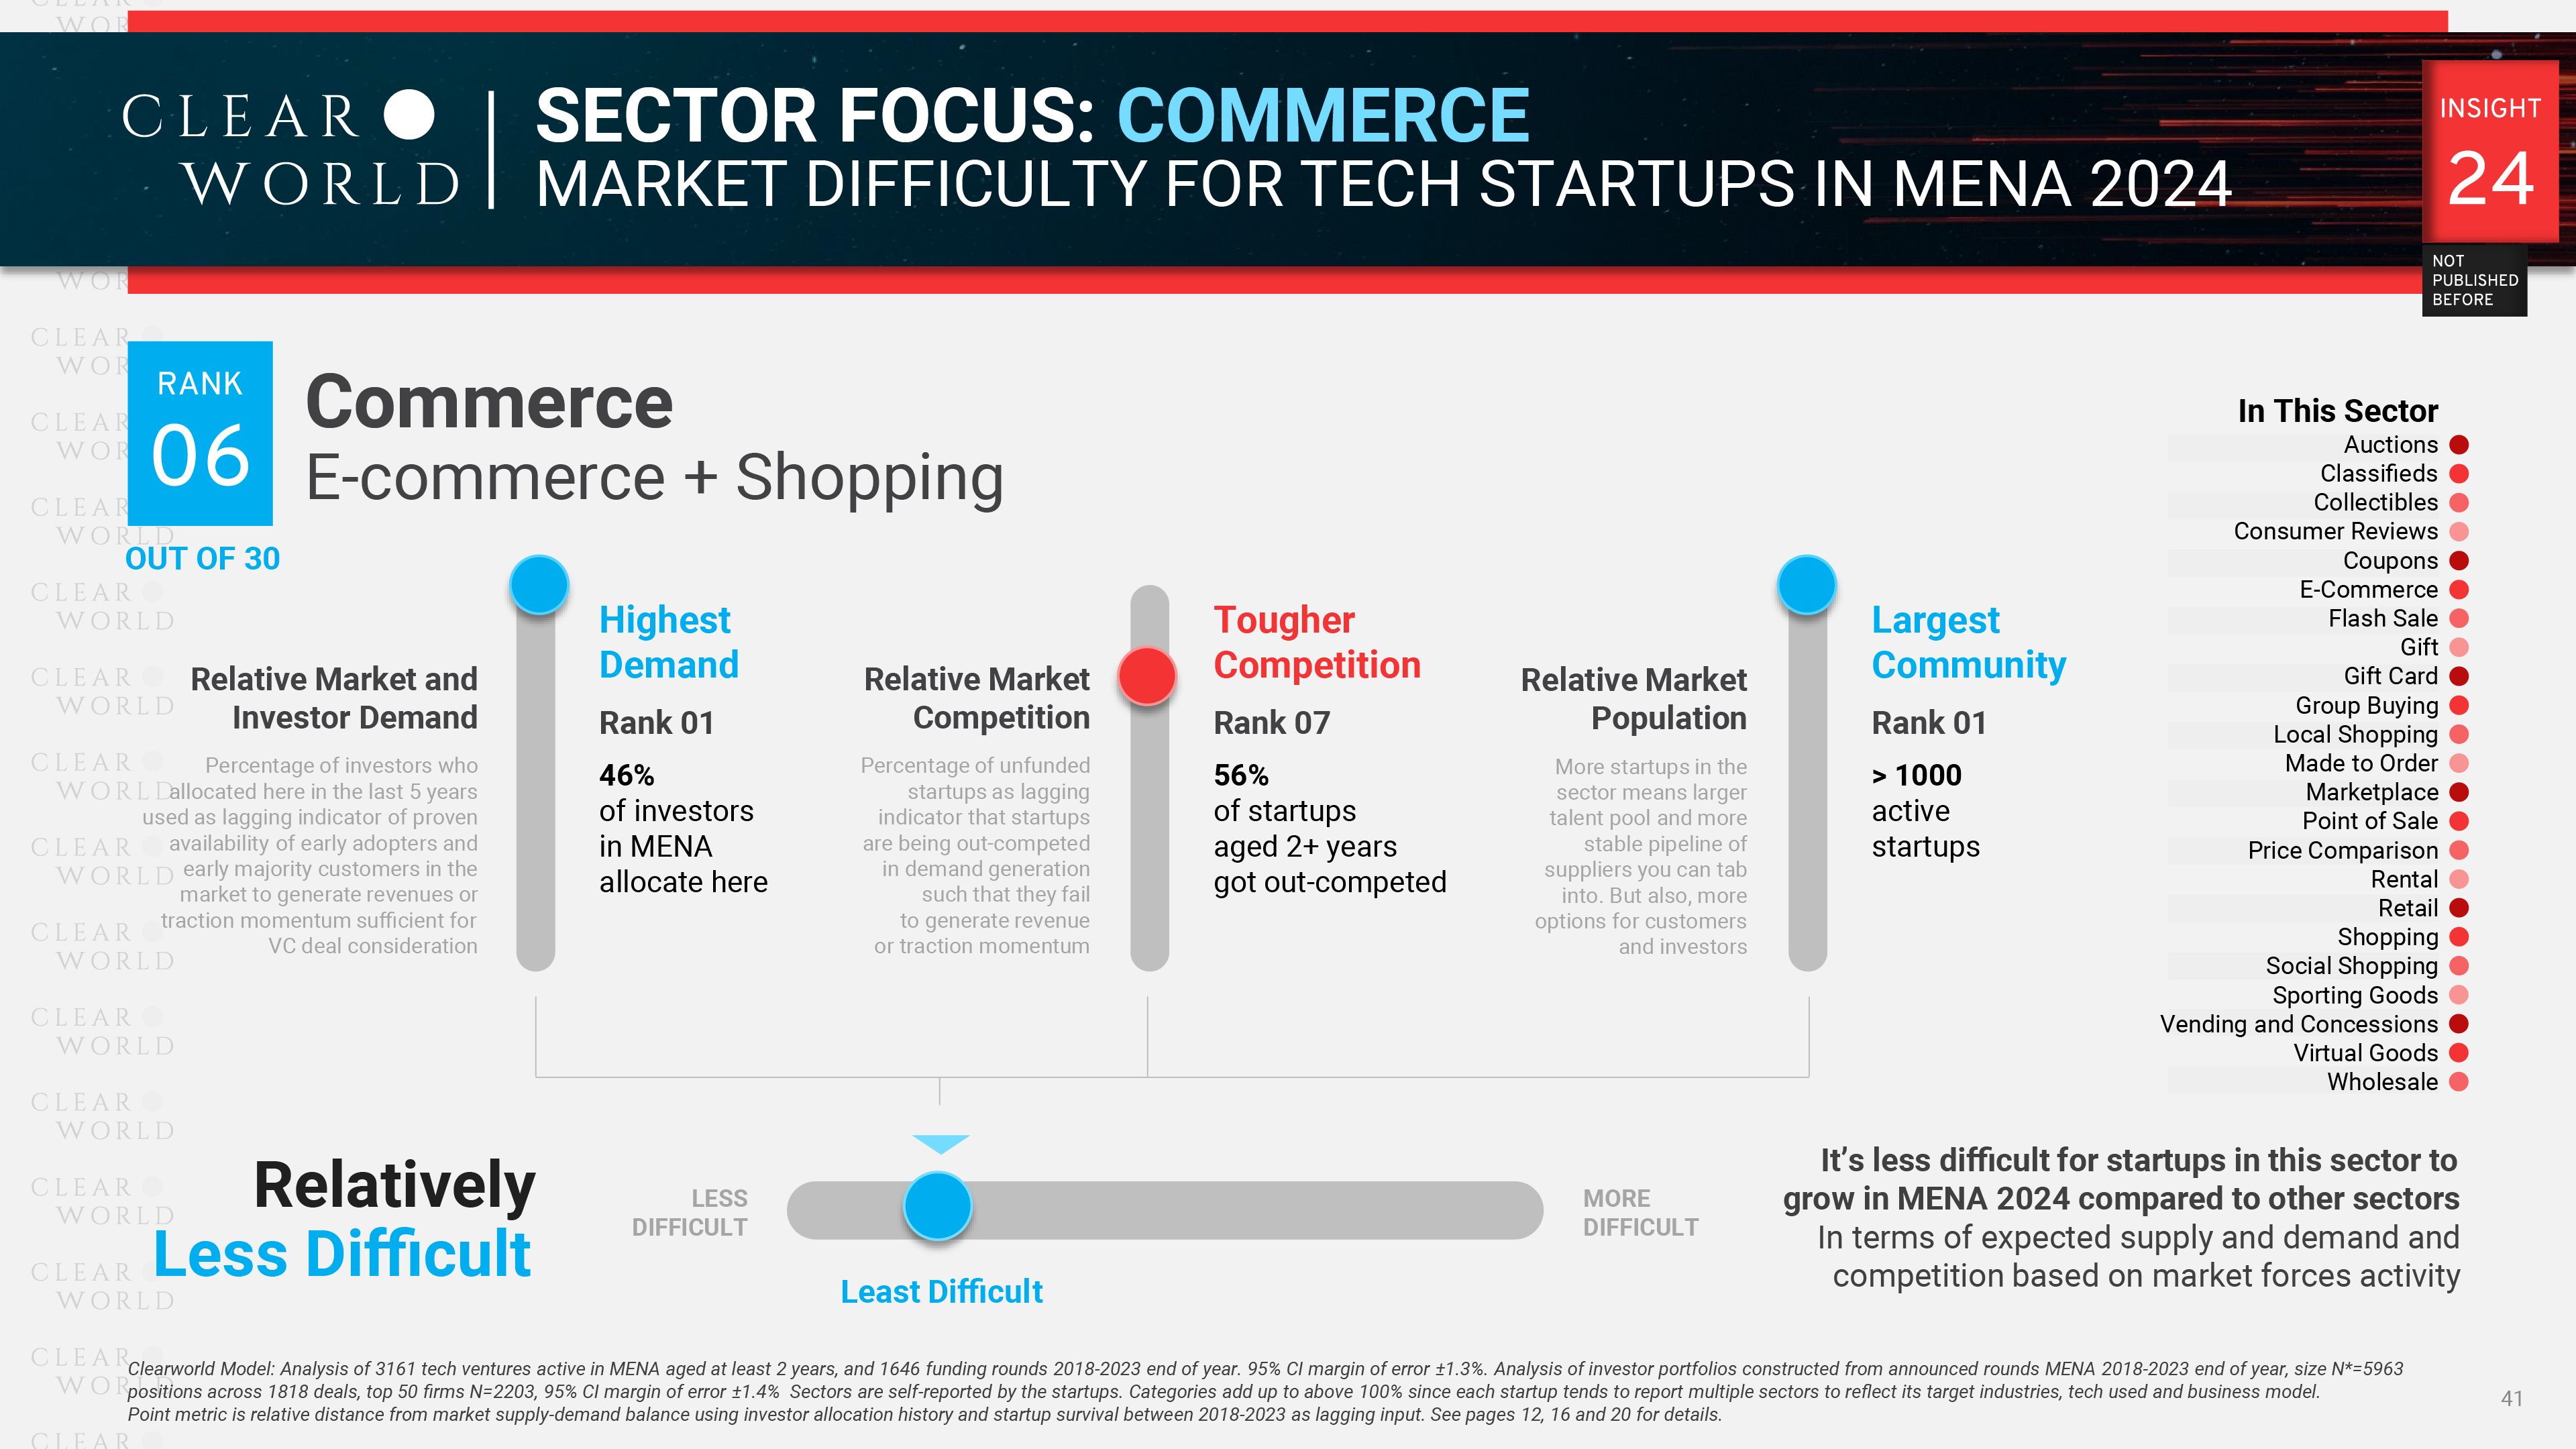 How Difficult Commerce Sector Is For MENA Startups 2024 - Clearworld